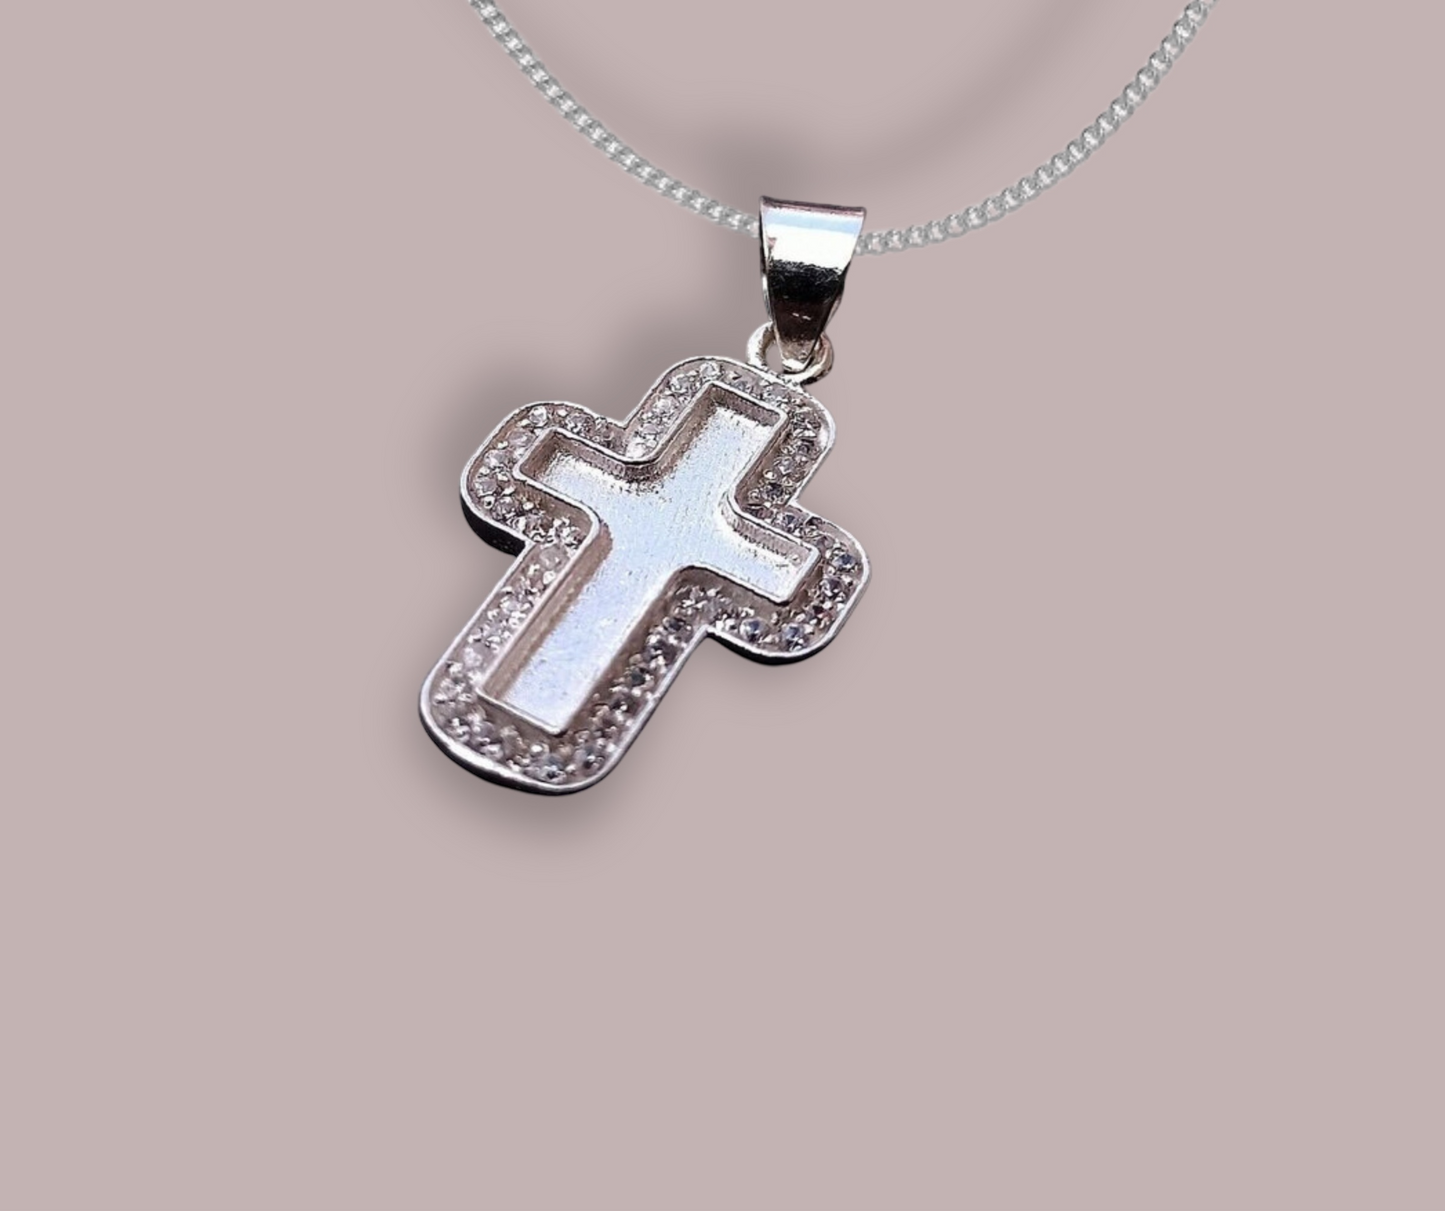 The CZ cross necklace